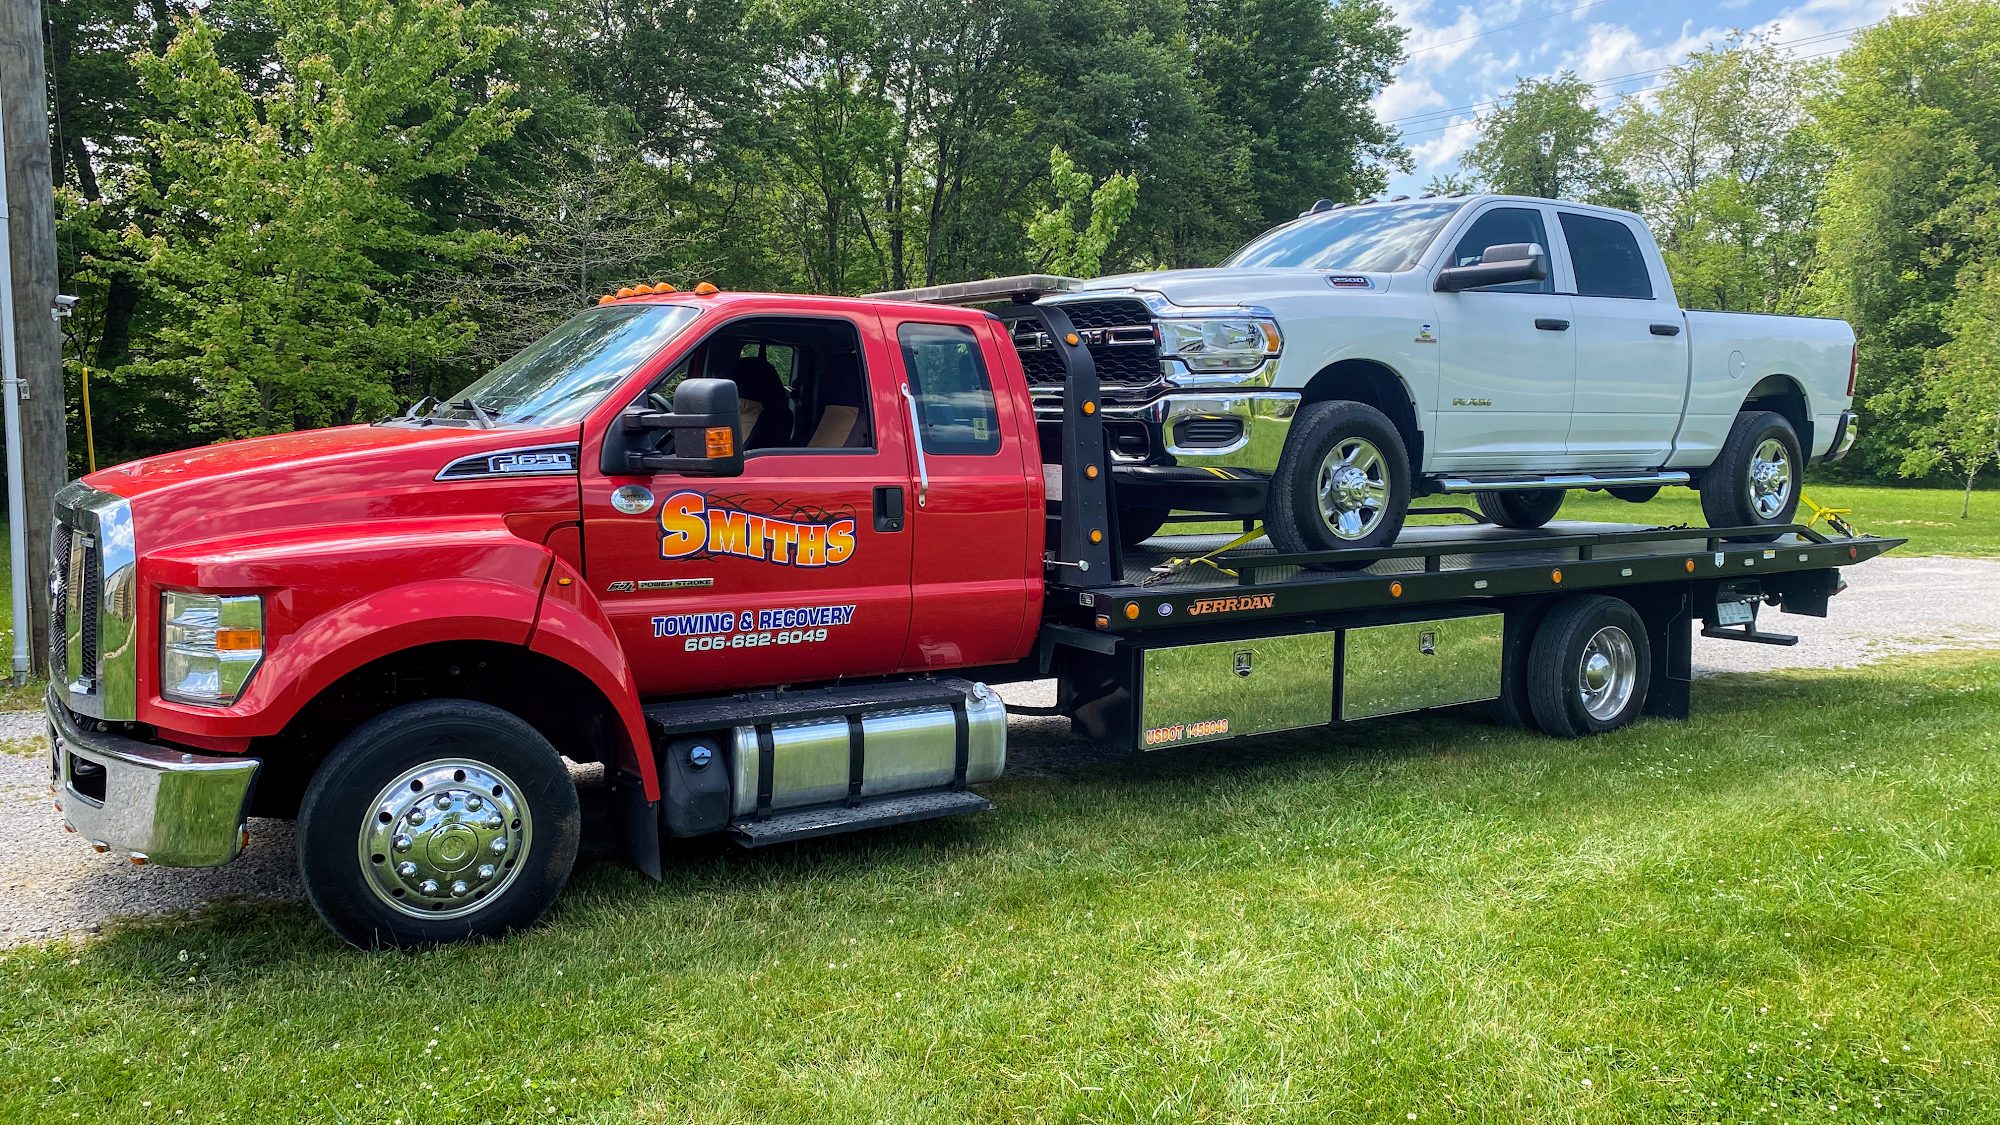 Smith’s Towing & Recovery LLC